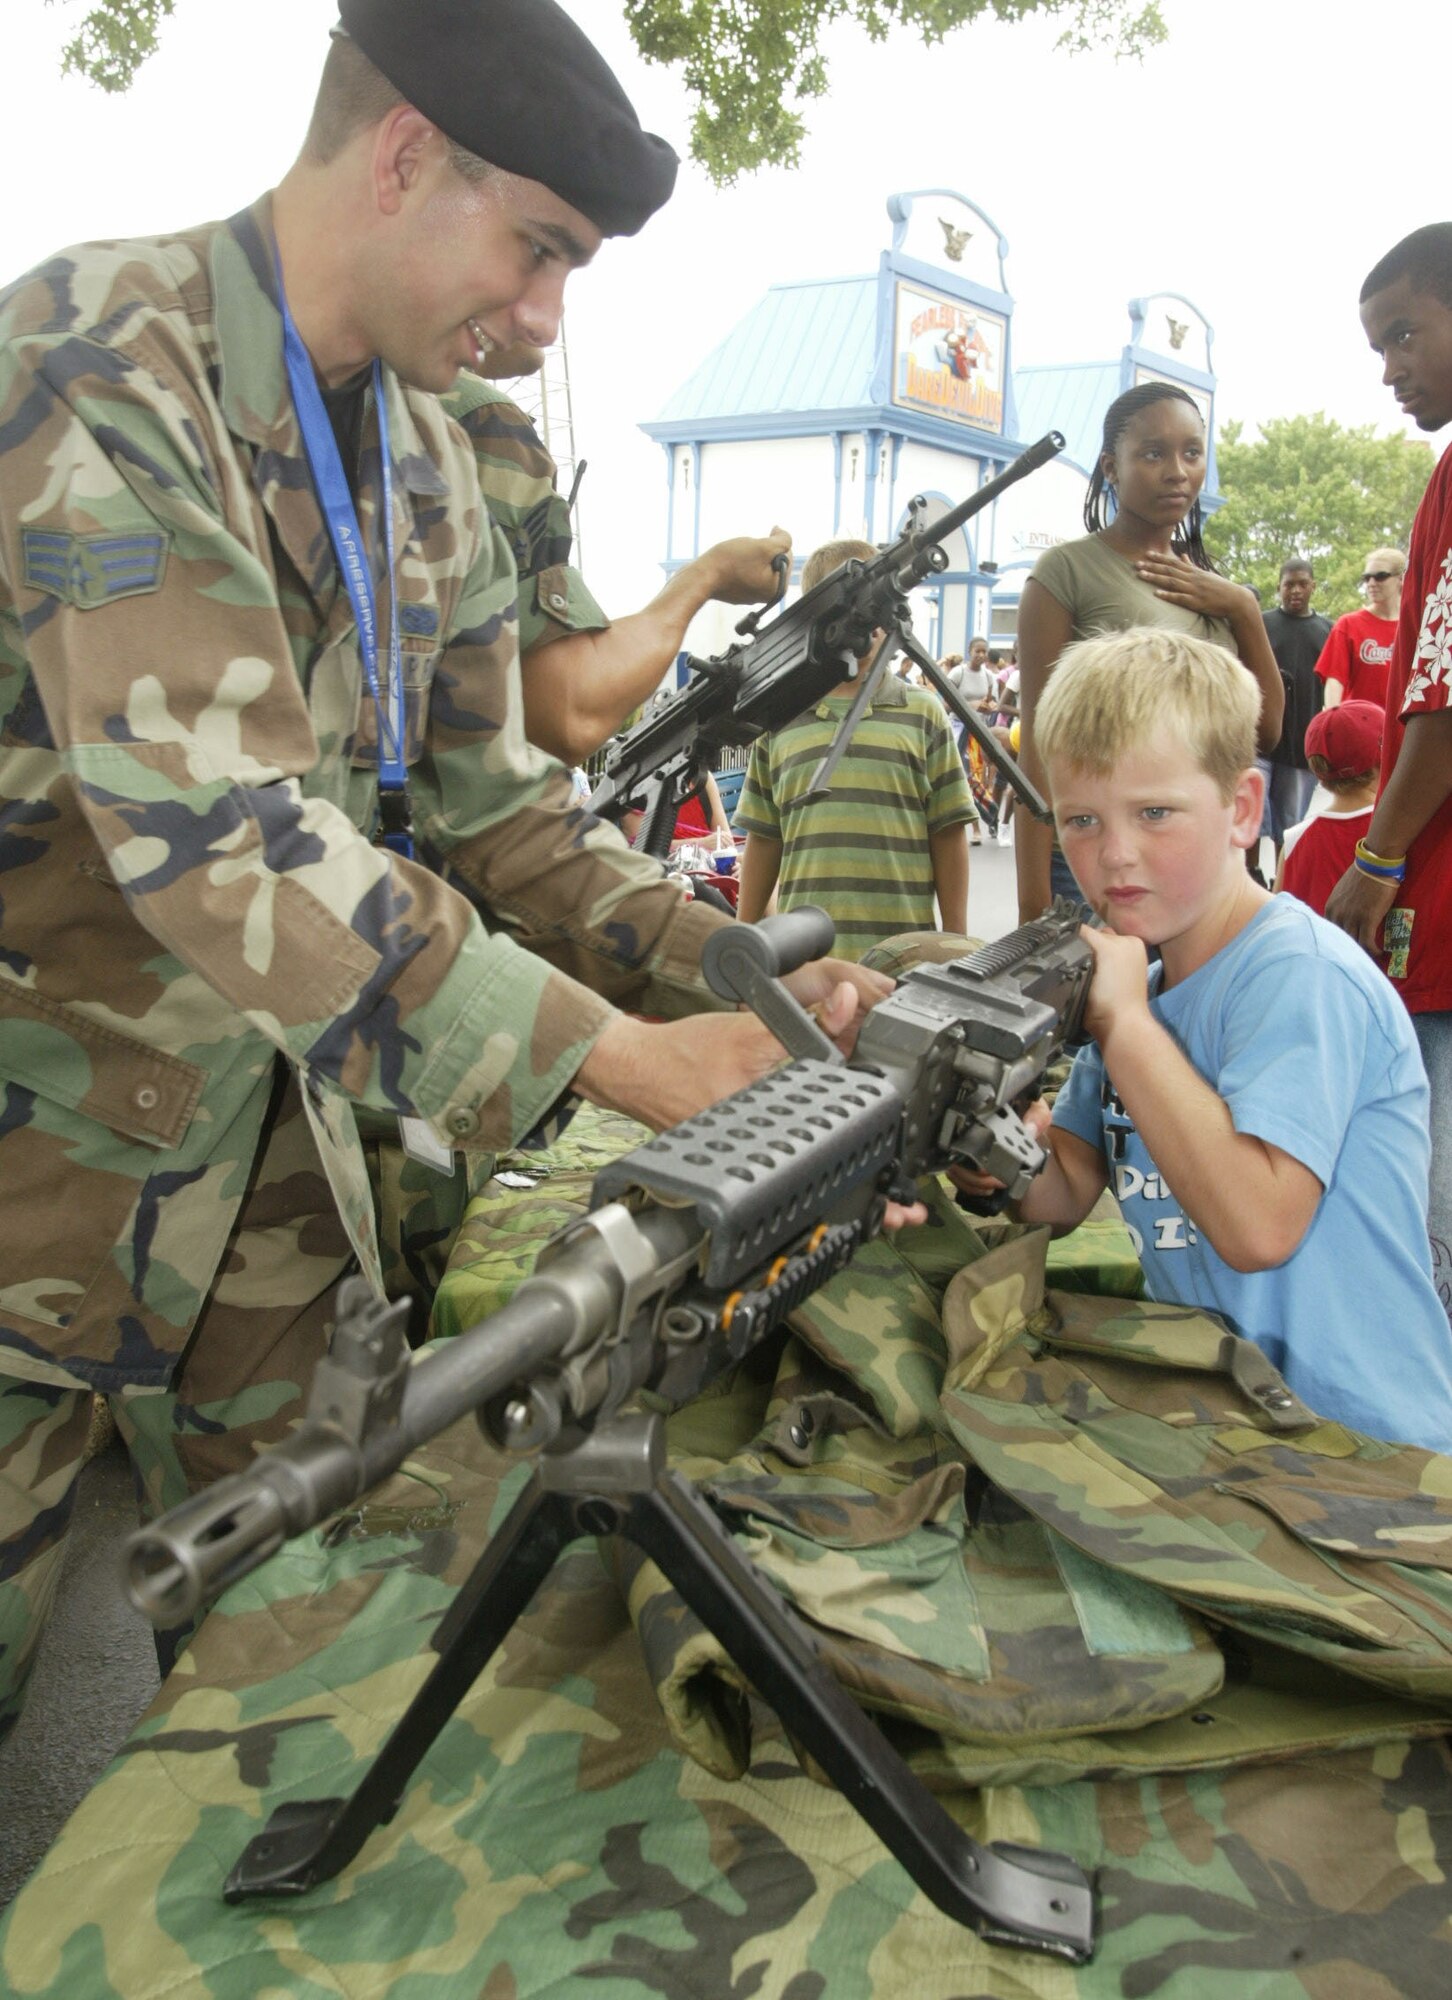 Senior Airman Brenton Hinkle from the 94th Security Forces Squadron assists Landon Sample with one of the weapons displayed at the Security Police vanue at Six Flags theme park on the 7th of July. (U.S. Air Force photo/Don Peek)